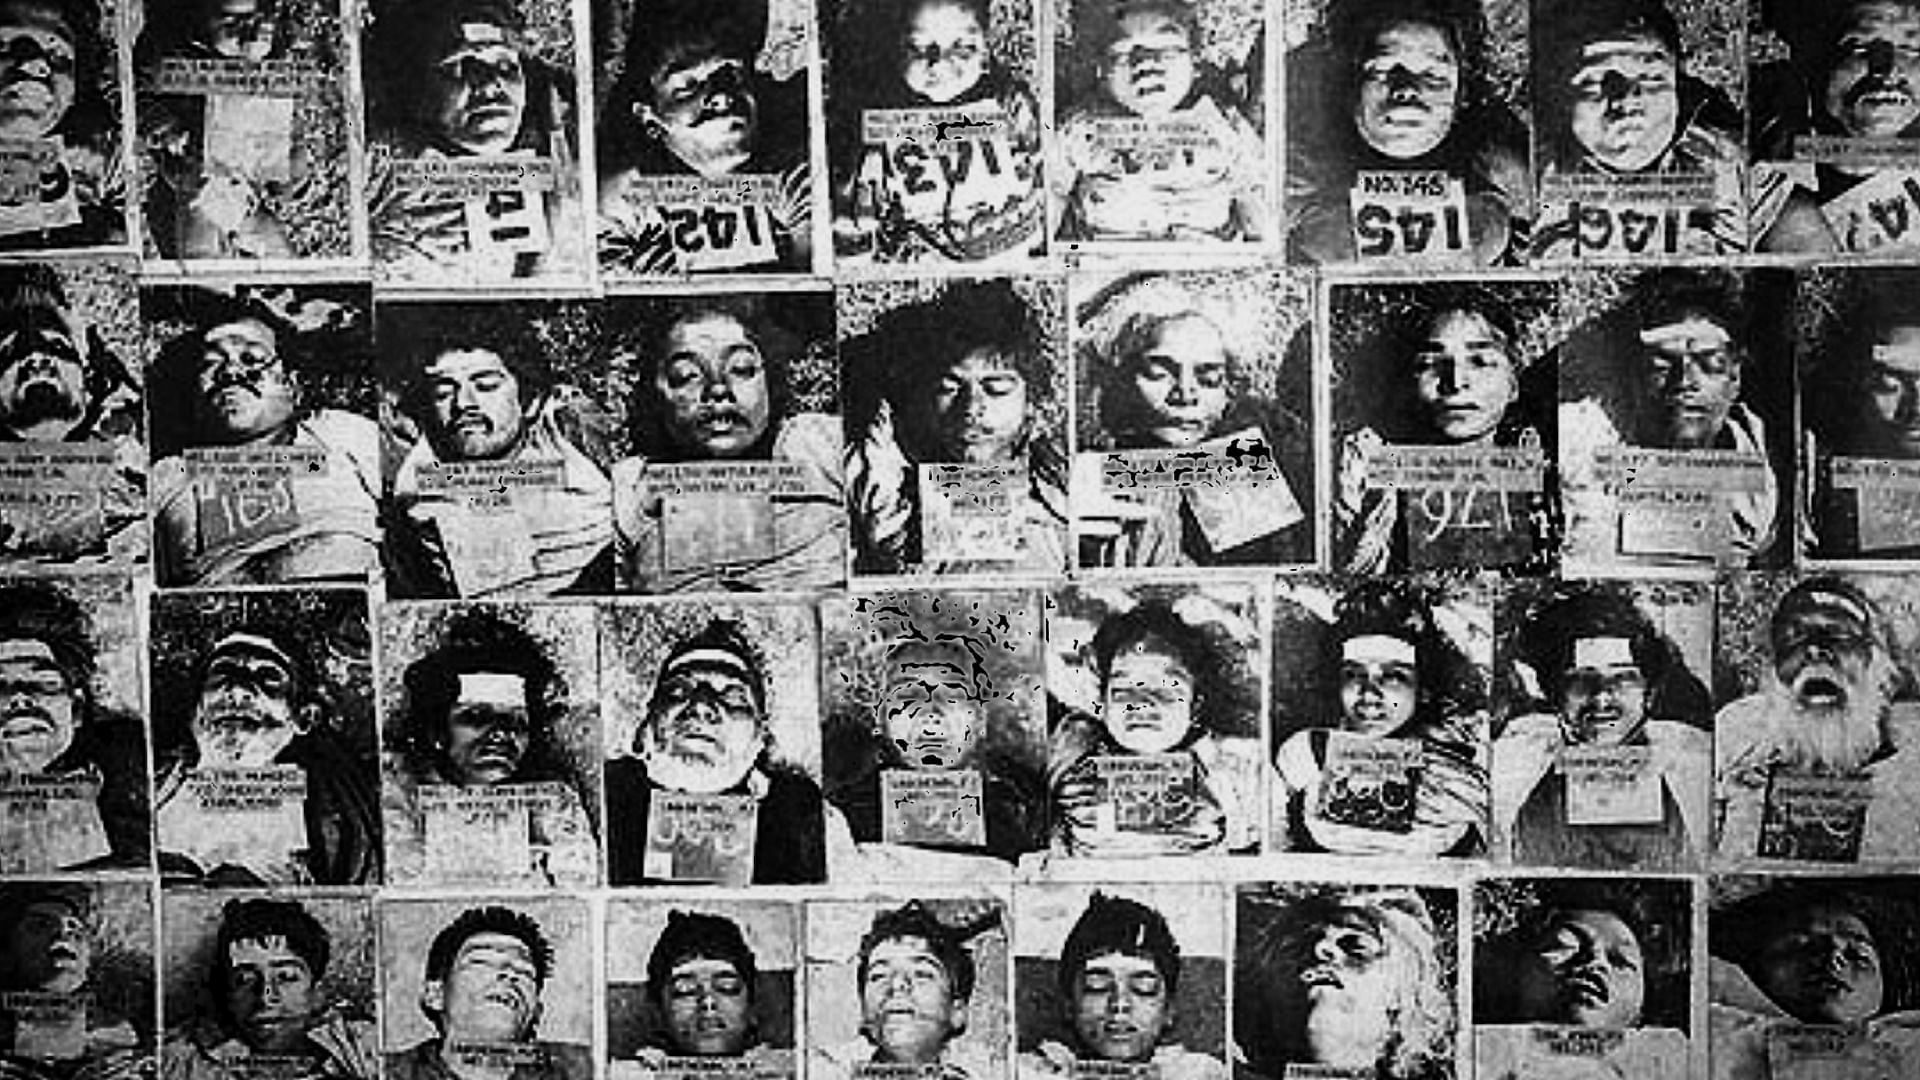 The Bhopal gas disaster took place on the intervening night of 2-3 December 1984.